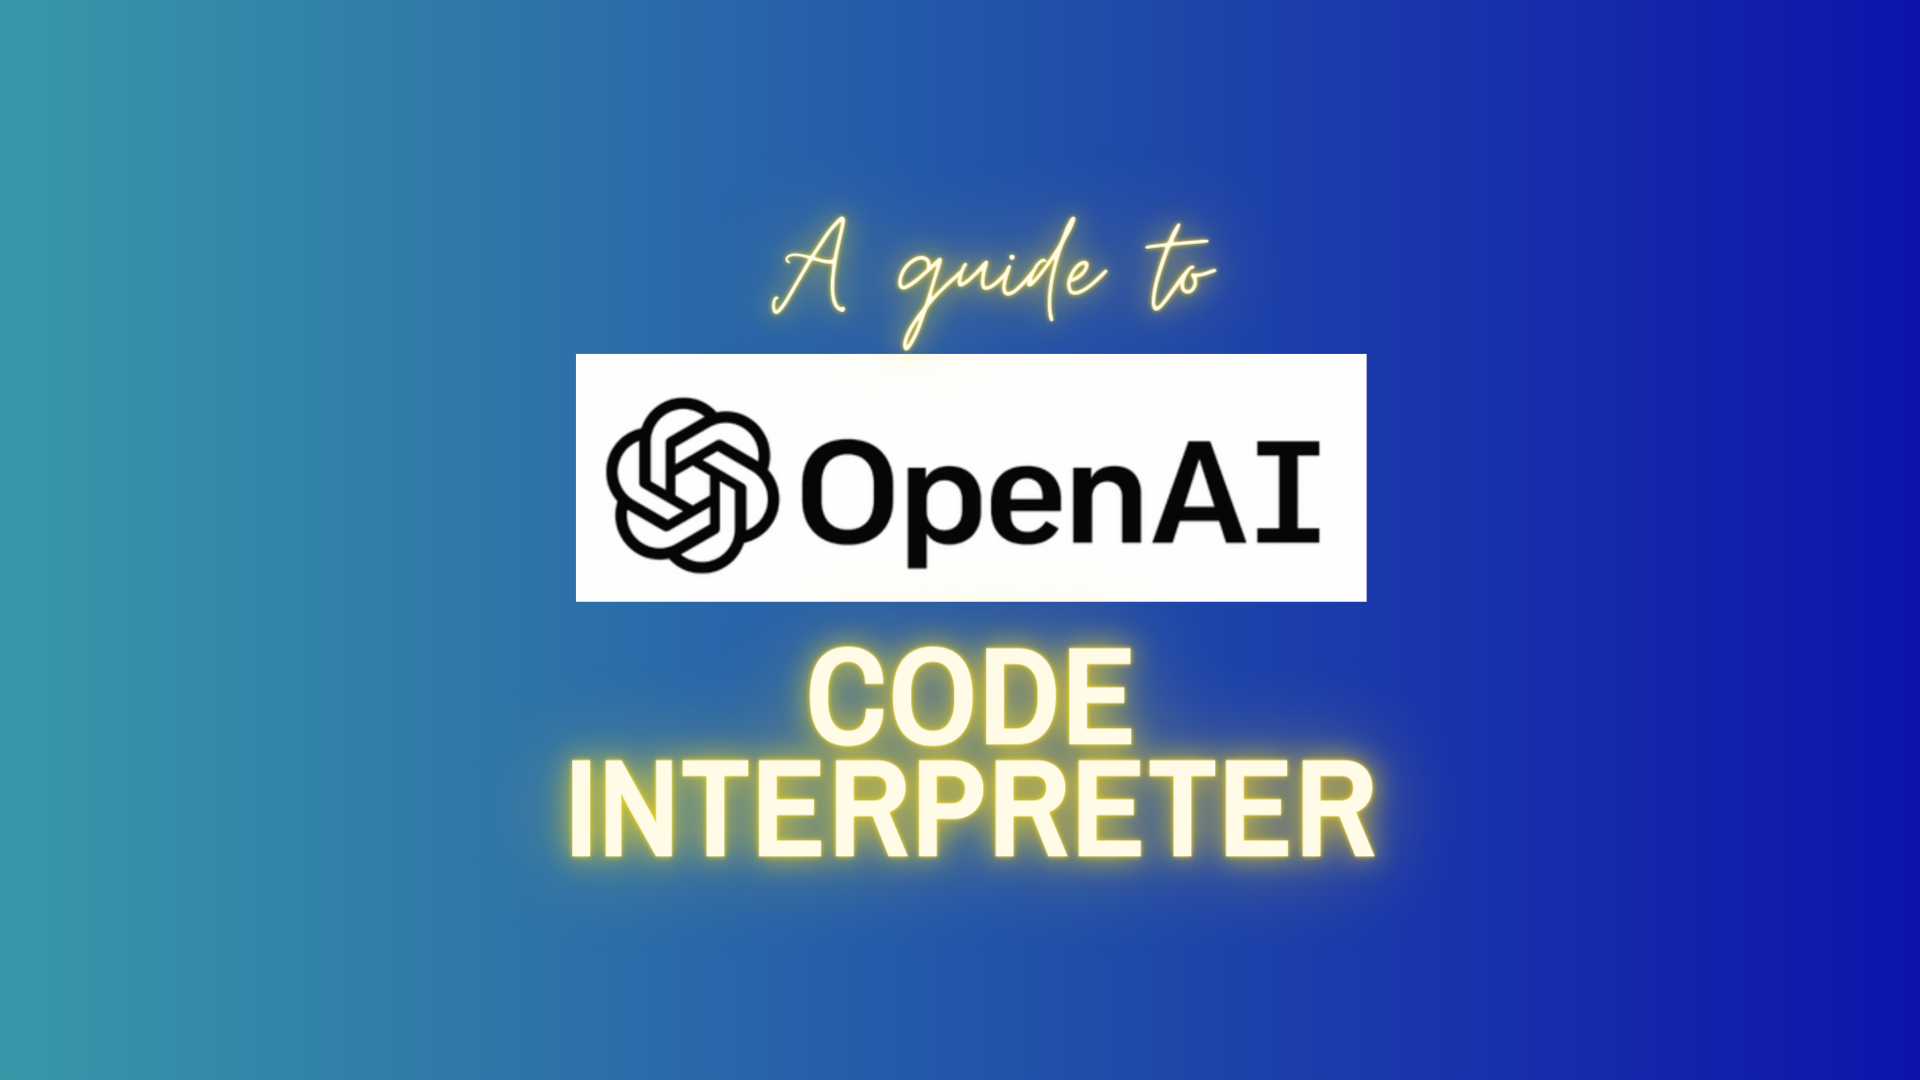 A guide to using ChatGPT's Code Interpreter, by Open AI, with blended dark and light blue background.